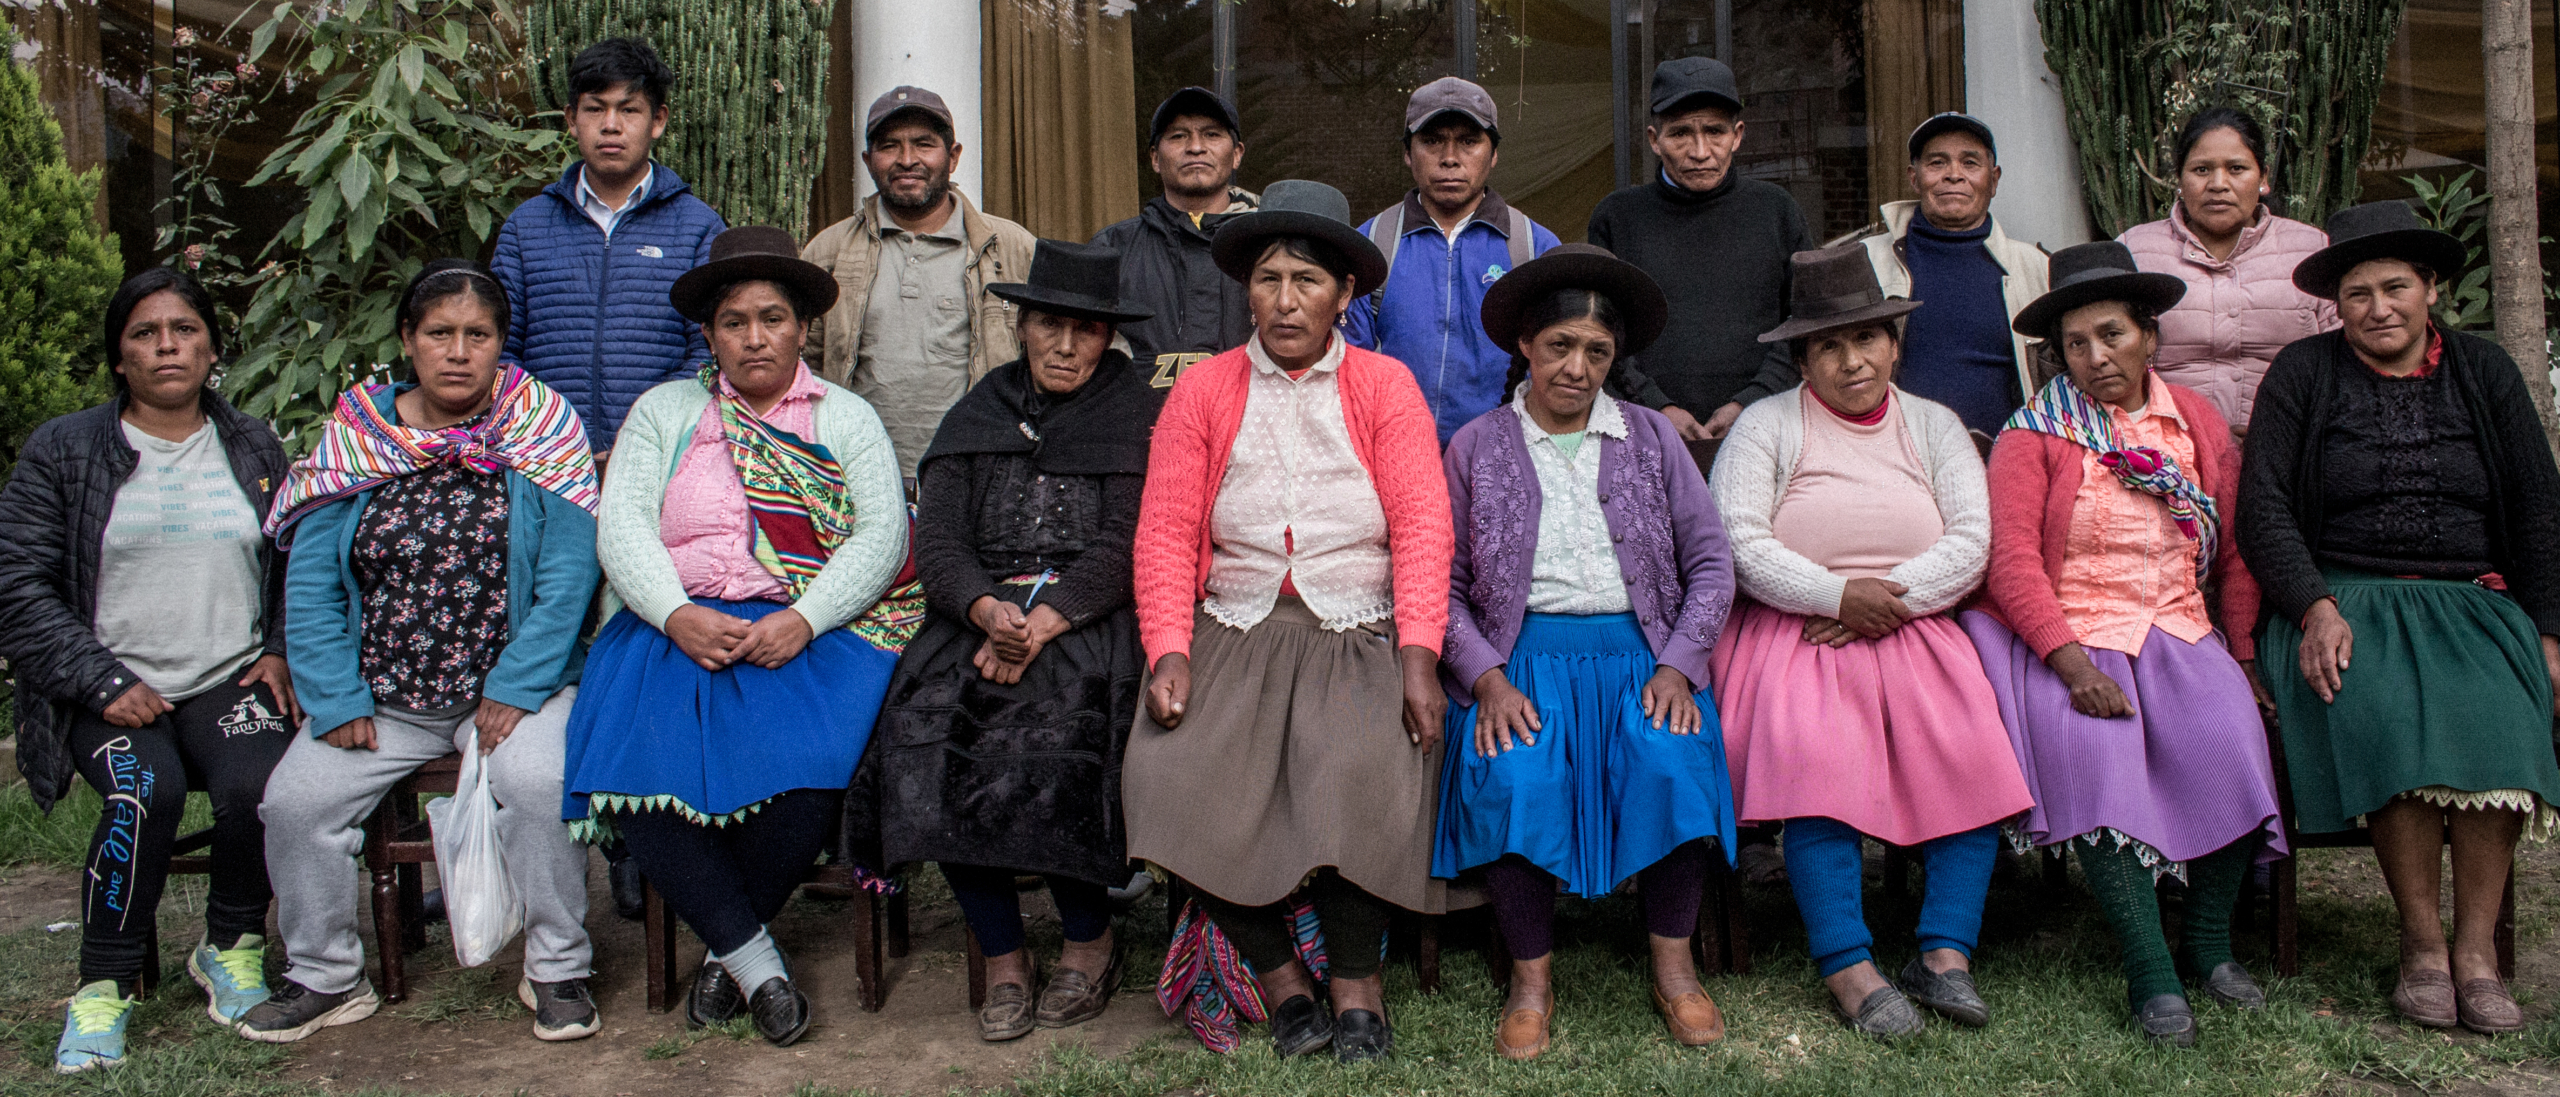 Relatives of victims of state repression pose for a photo in Andahuaylas